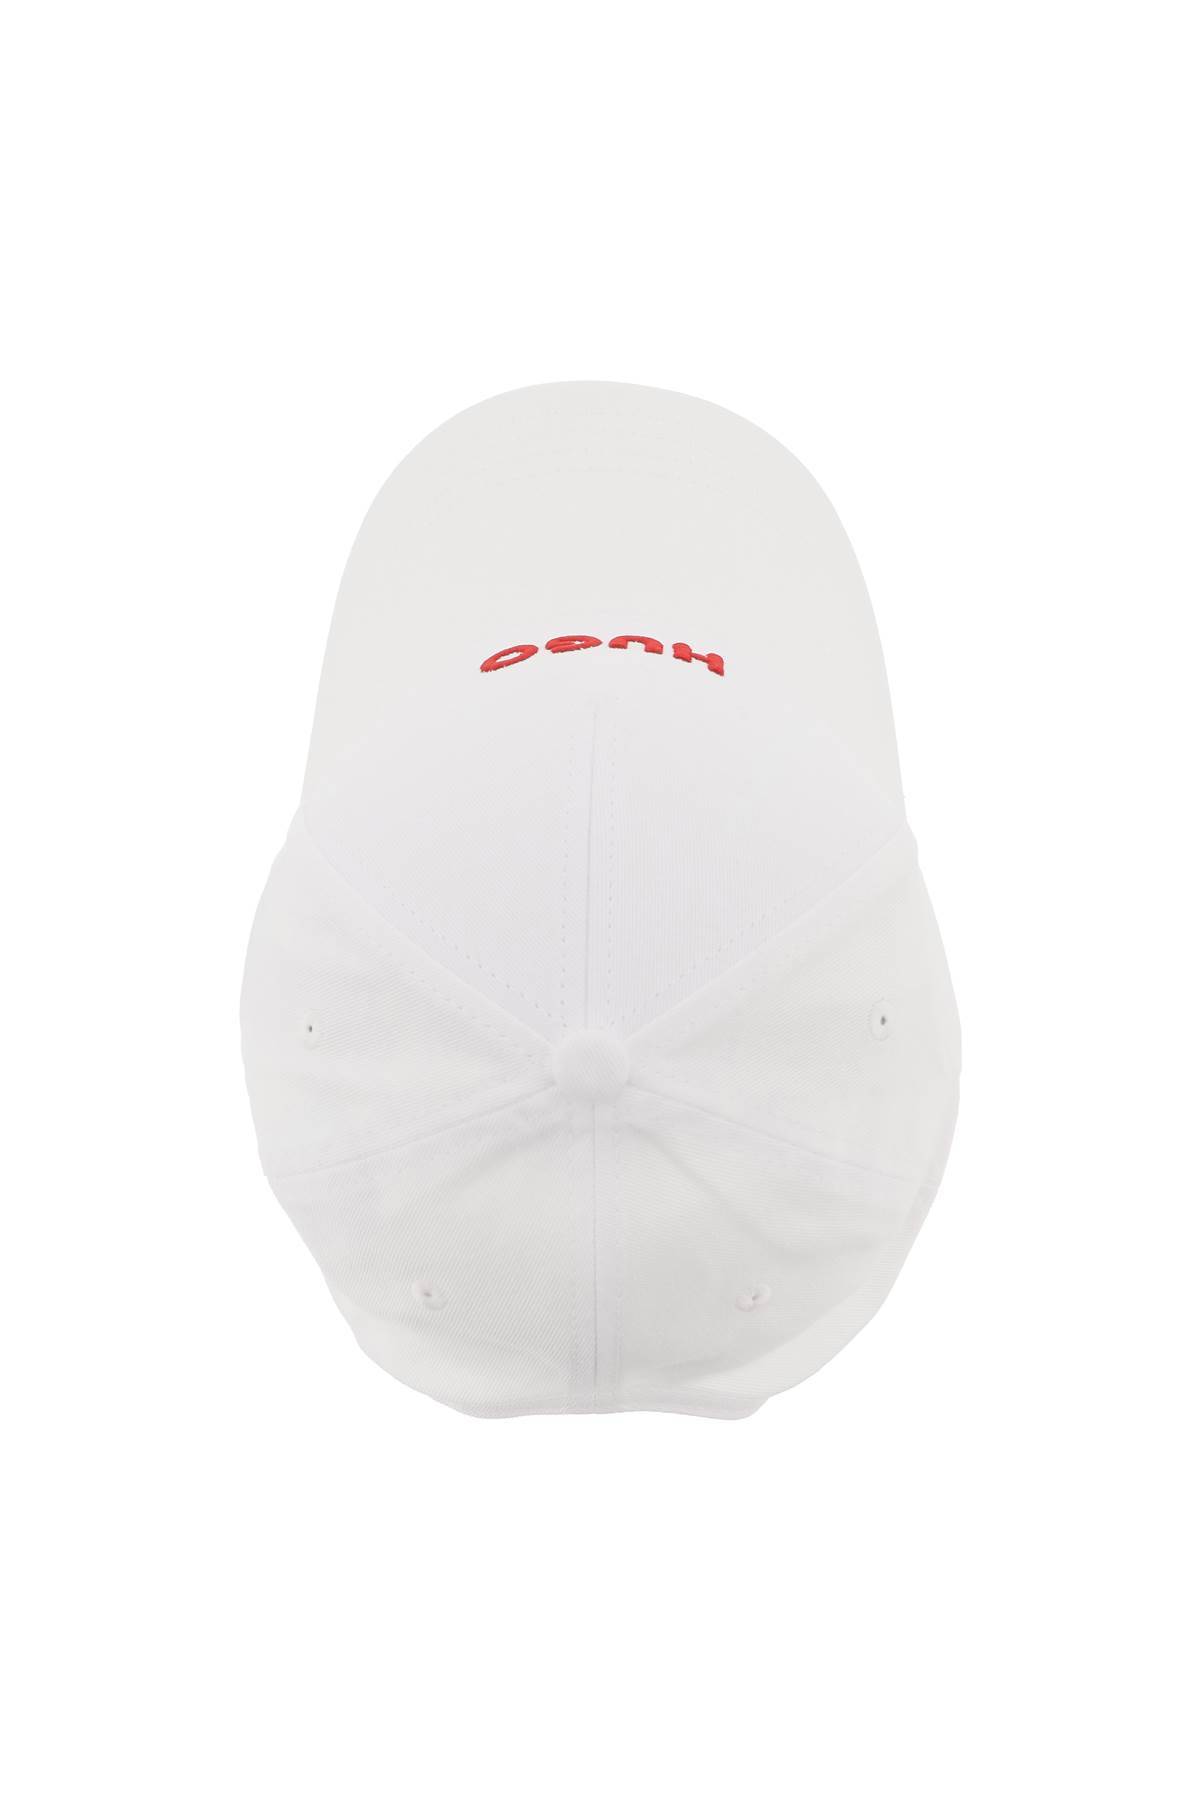 Shop Hugo "jude Embroidered Logo Baseball Cap With In White